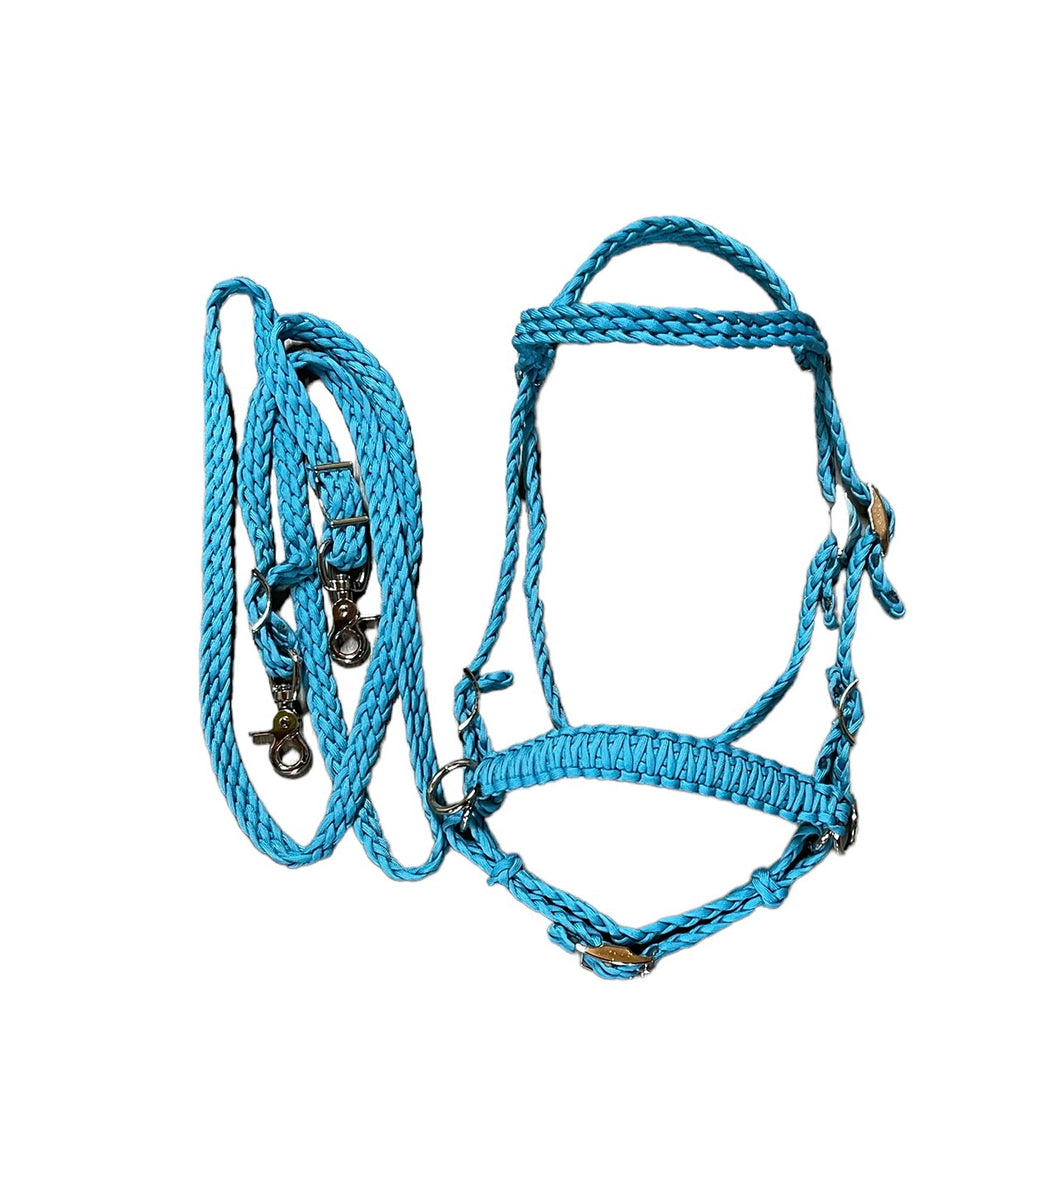 complete bitless bridle side pull hackamore neon turquoise ....pony, Cob, Horse. or Draft horse size